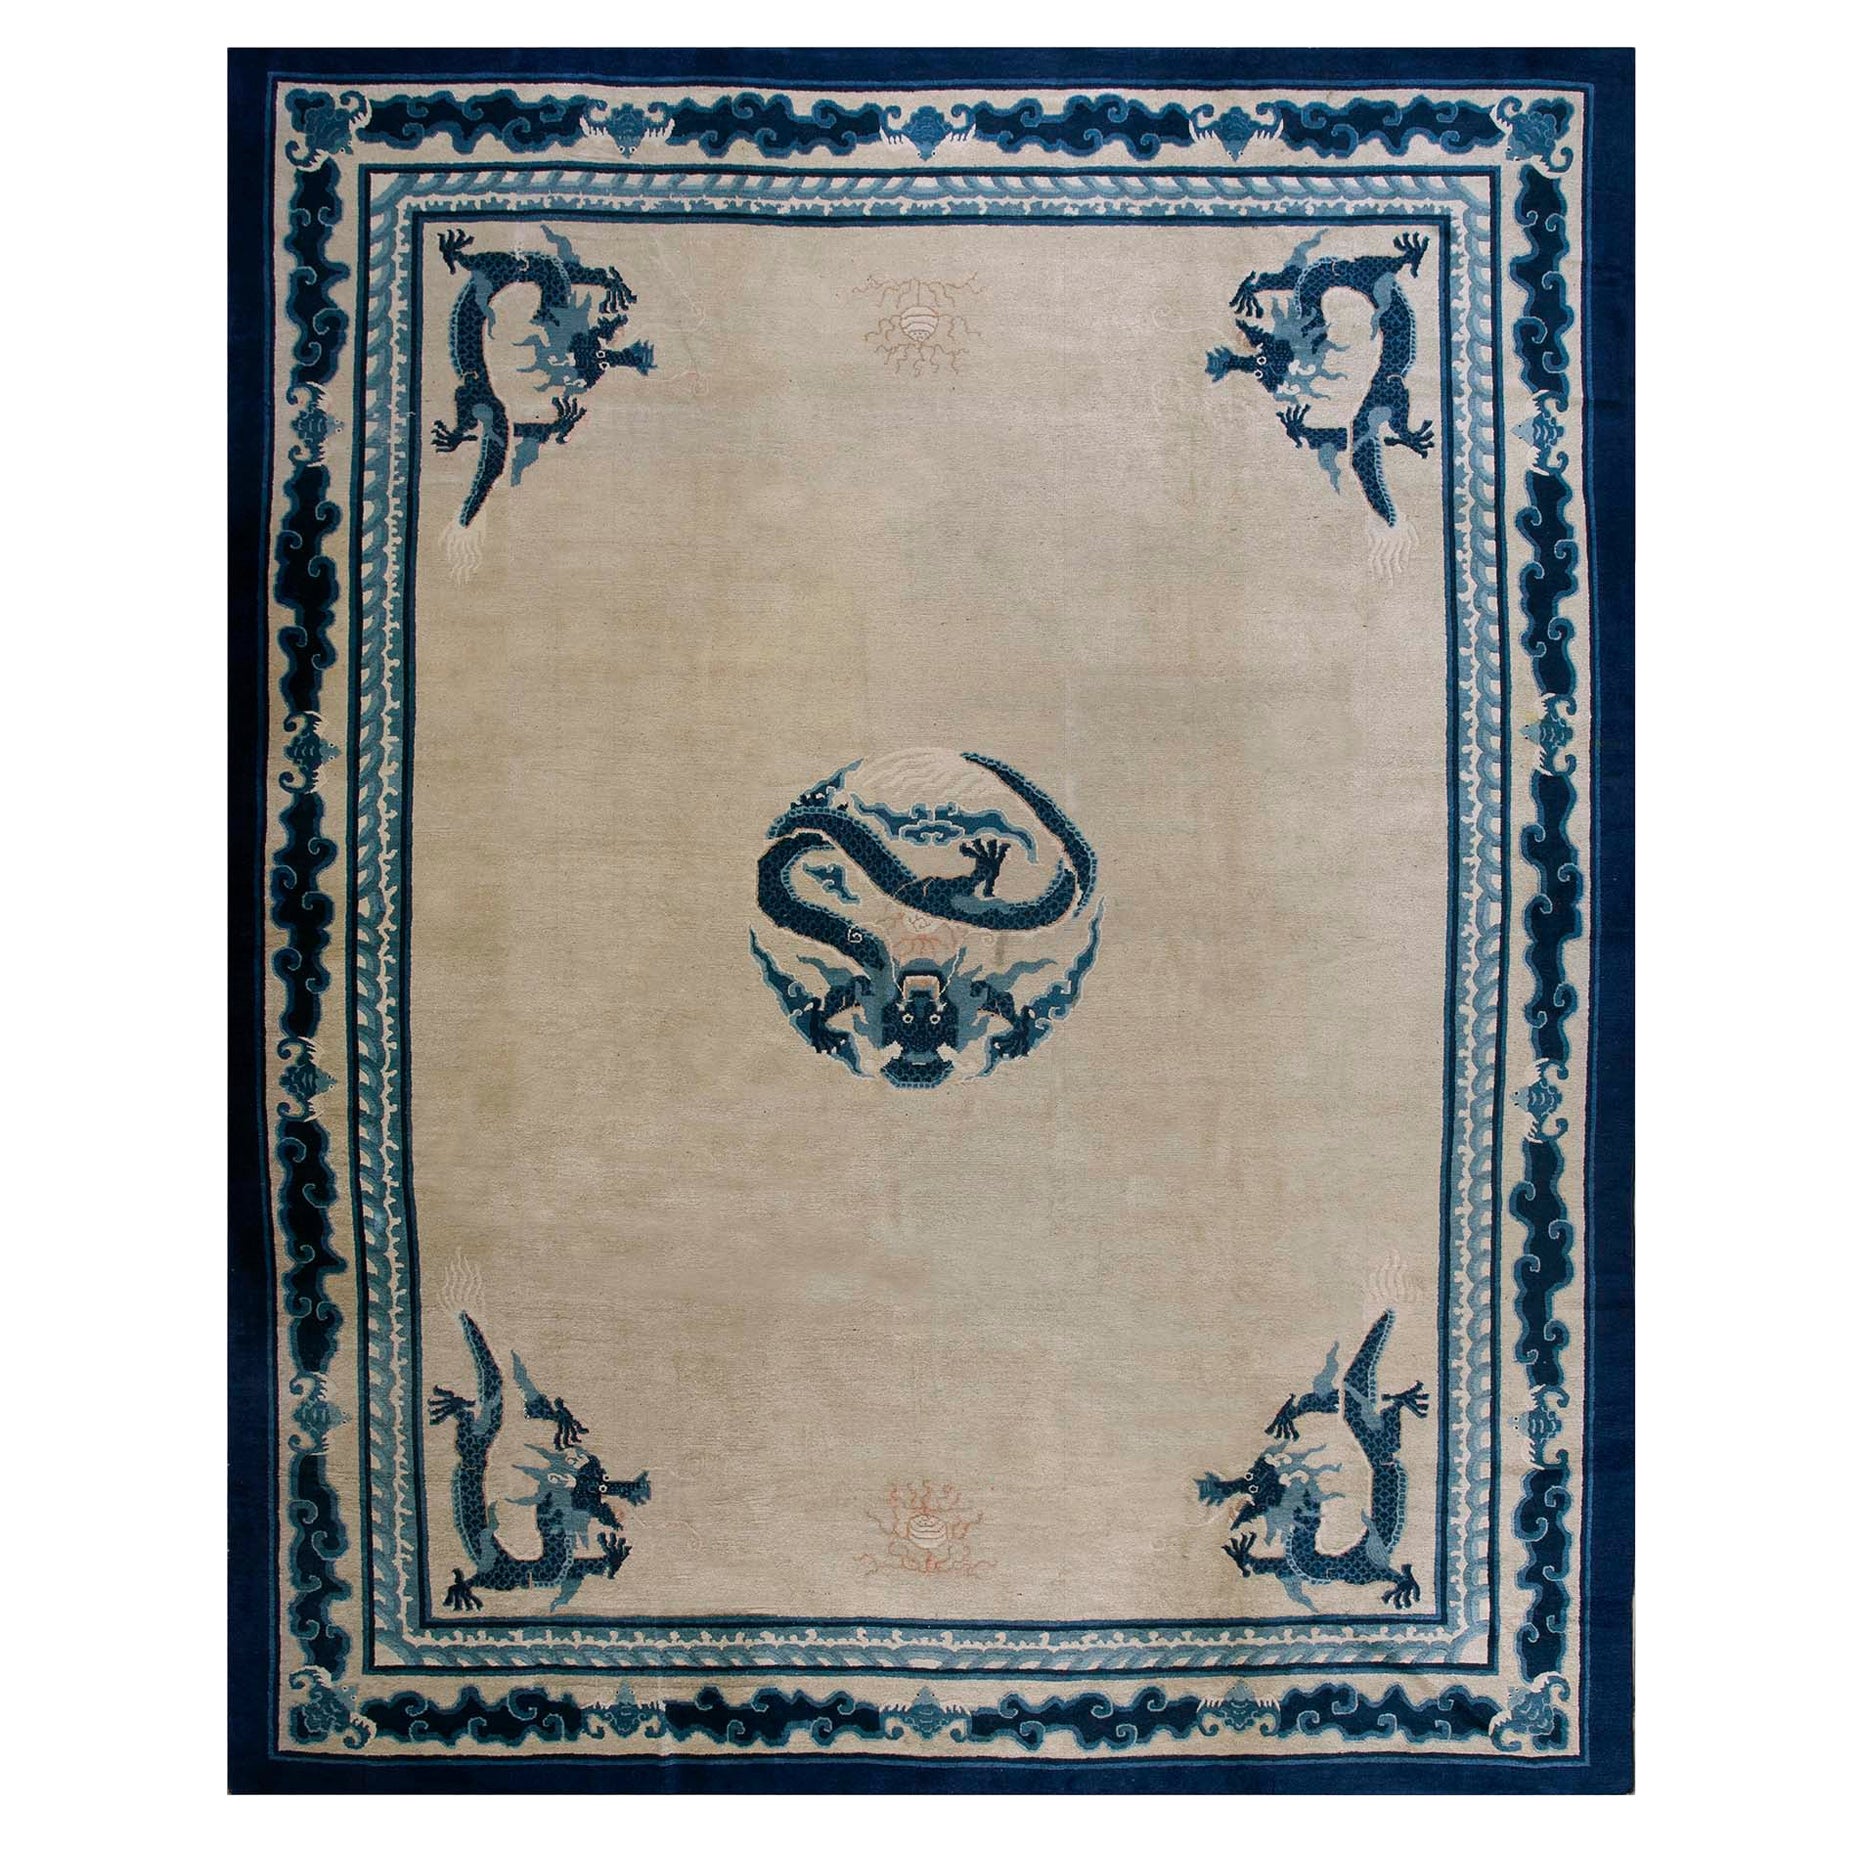 Late 19th Century Chinese Peking Dragon Carpet ( 10'2" x 12'8" - 310 x 385 ) For Sale